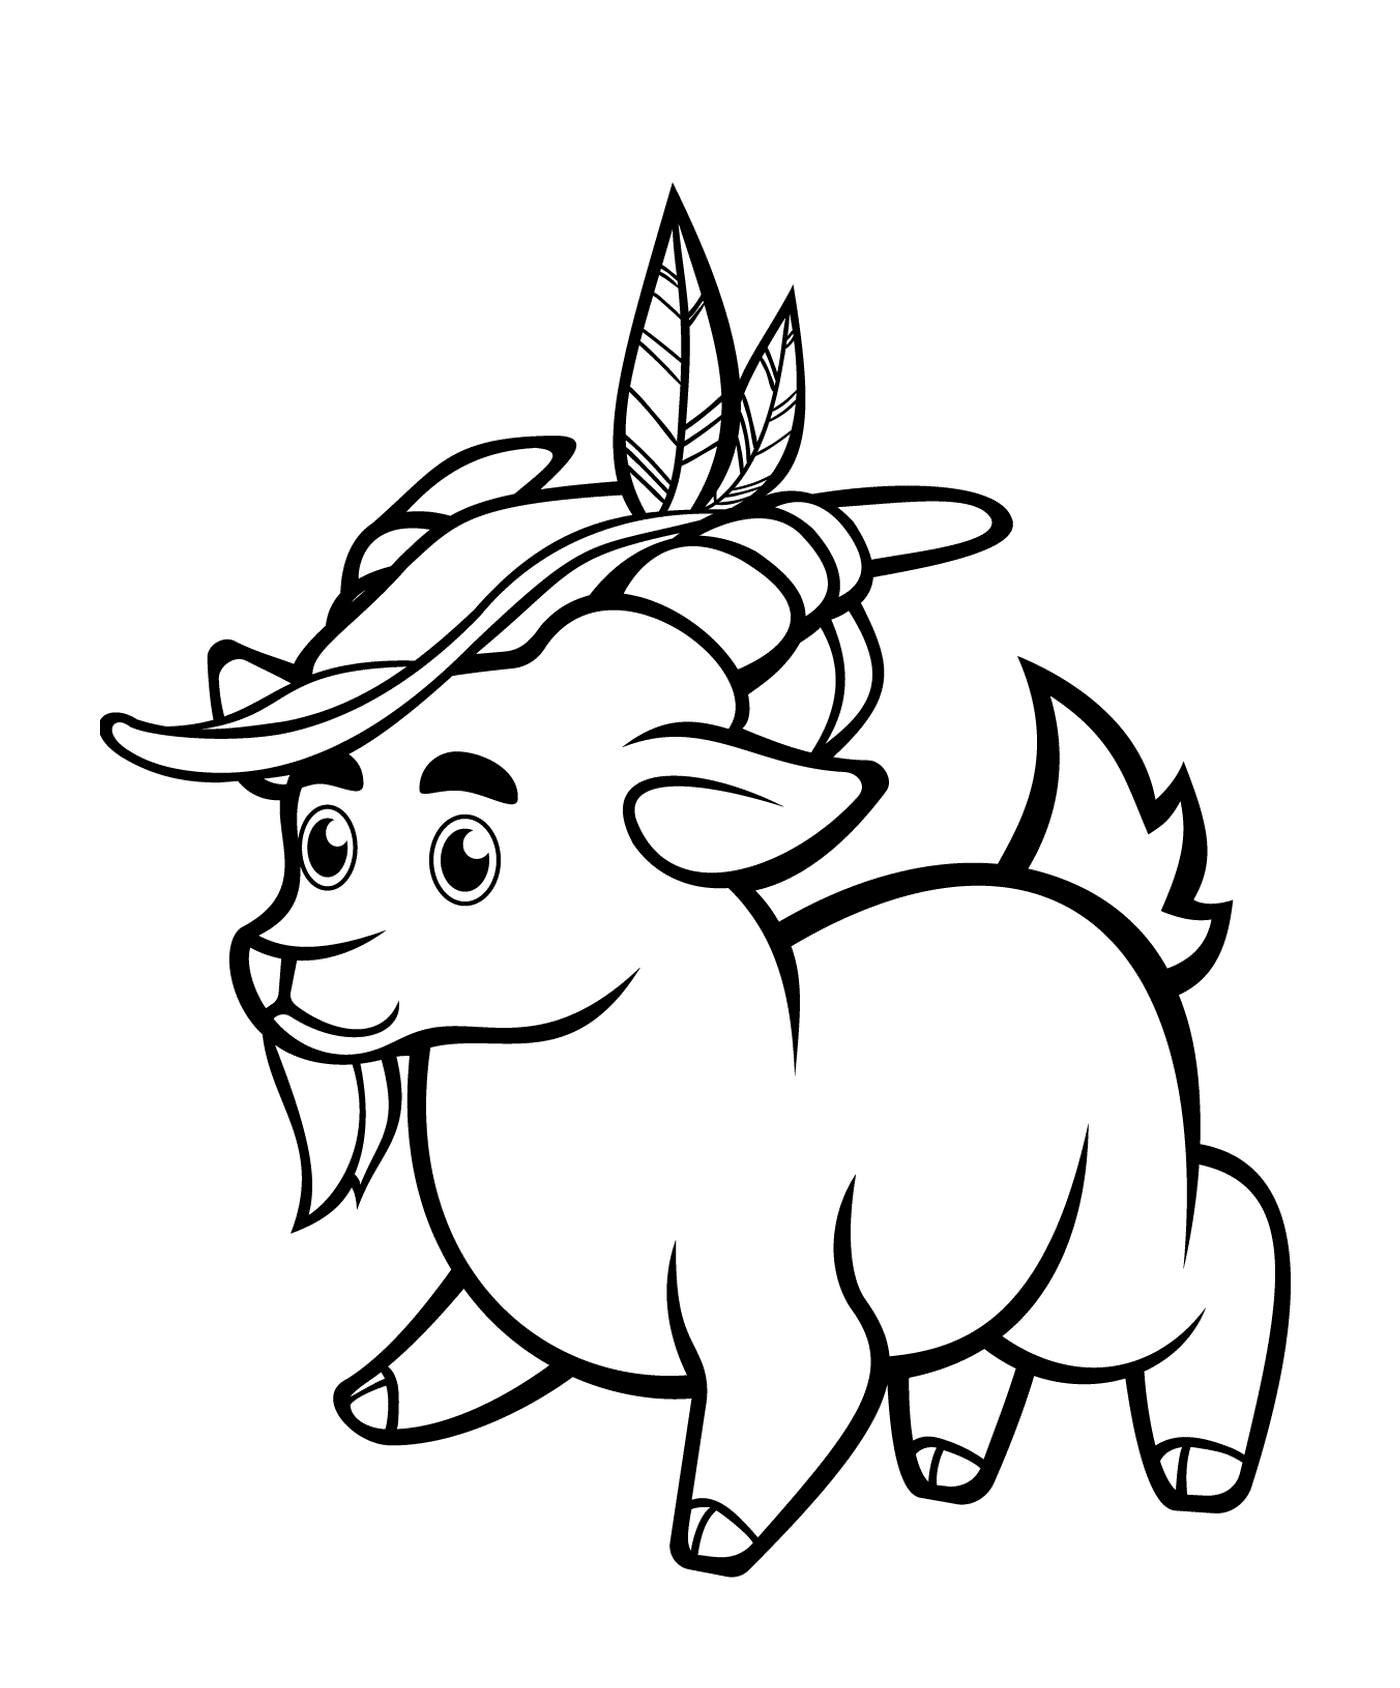  An animal with an alpine hat 